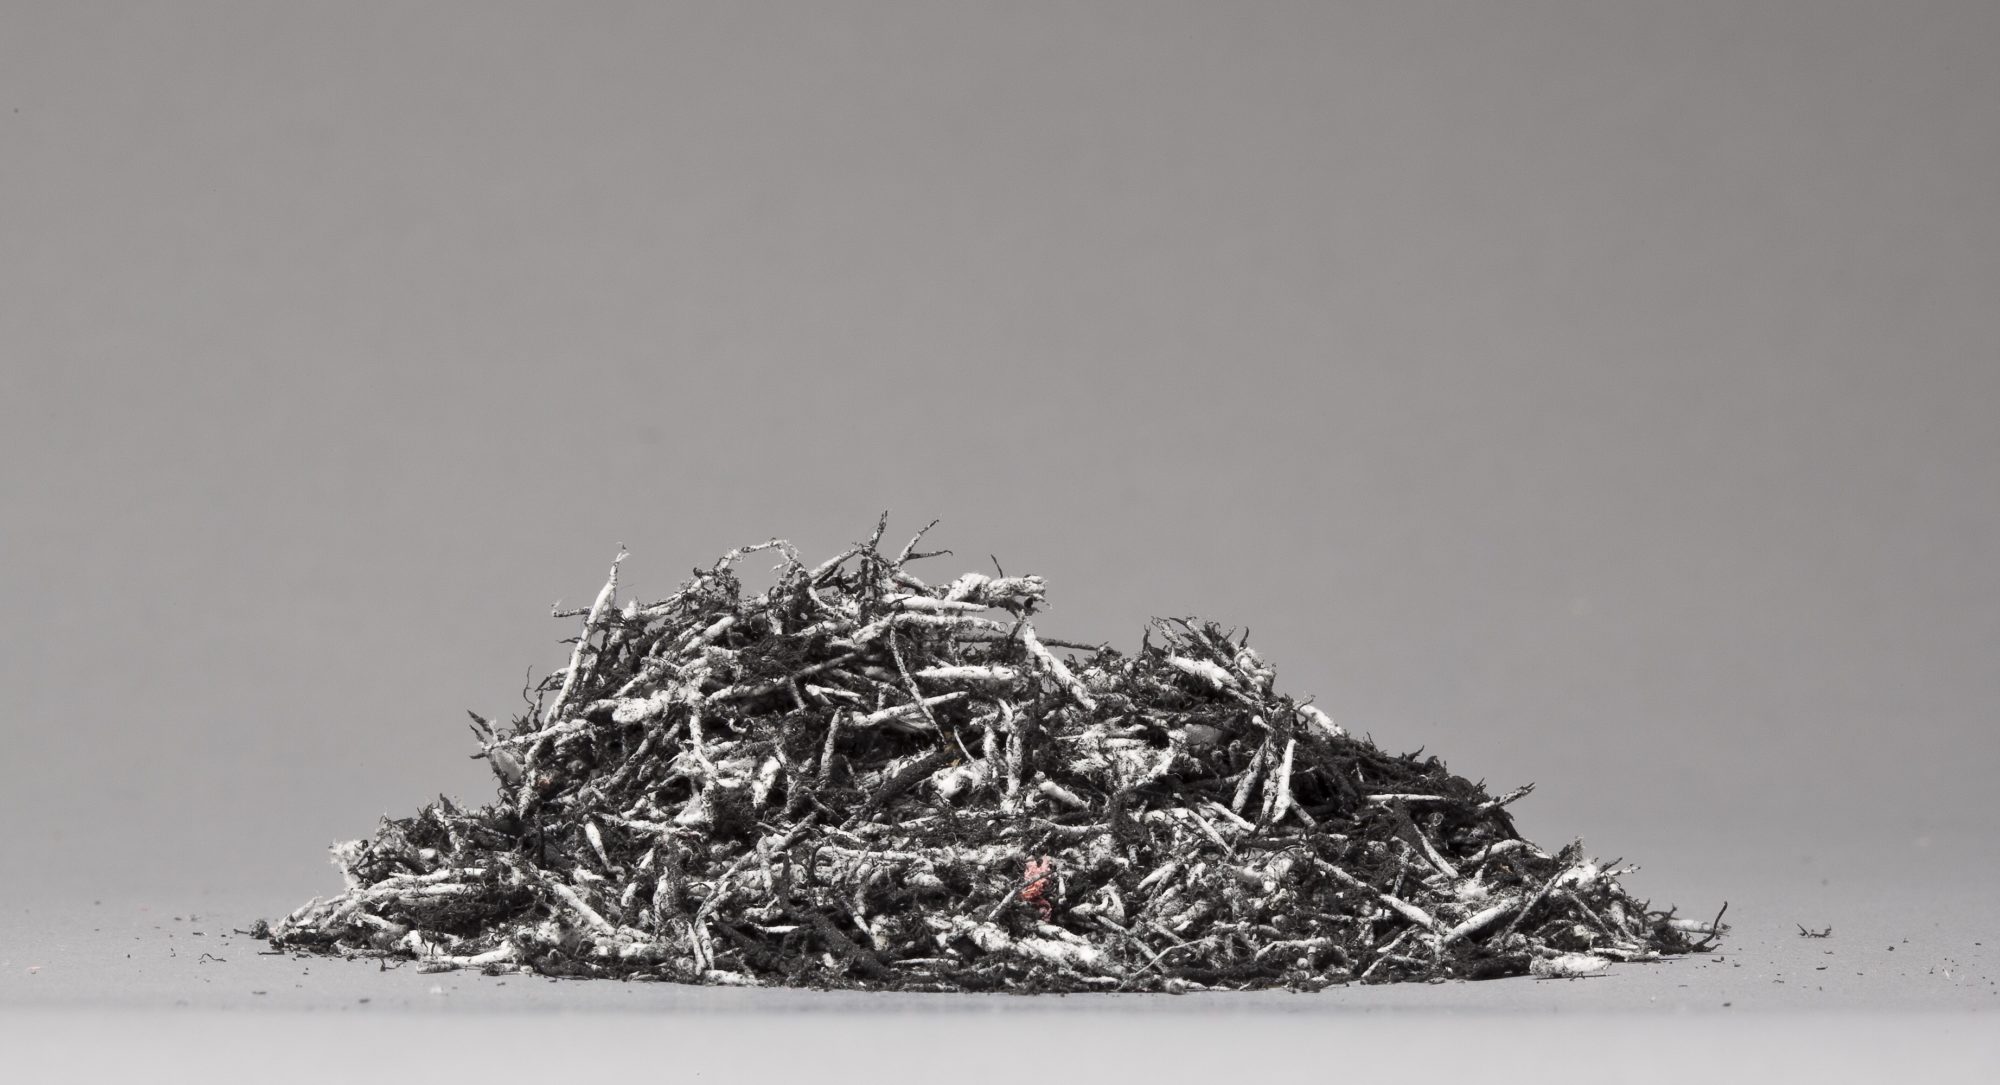 A pile of used eraser shavings on a matte gray surface, just off center from the middle of the stack there is a single pink eraser